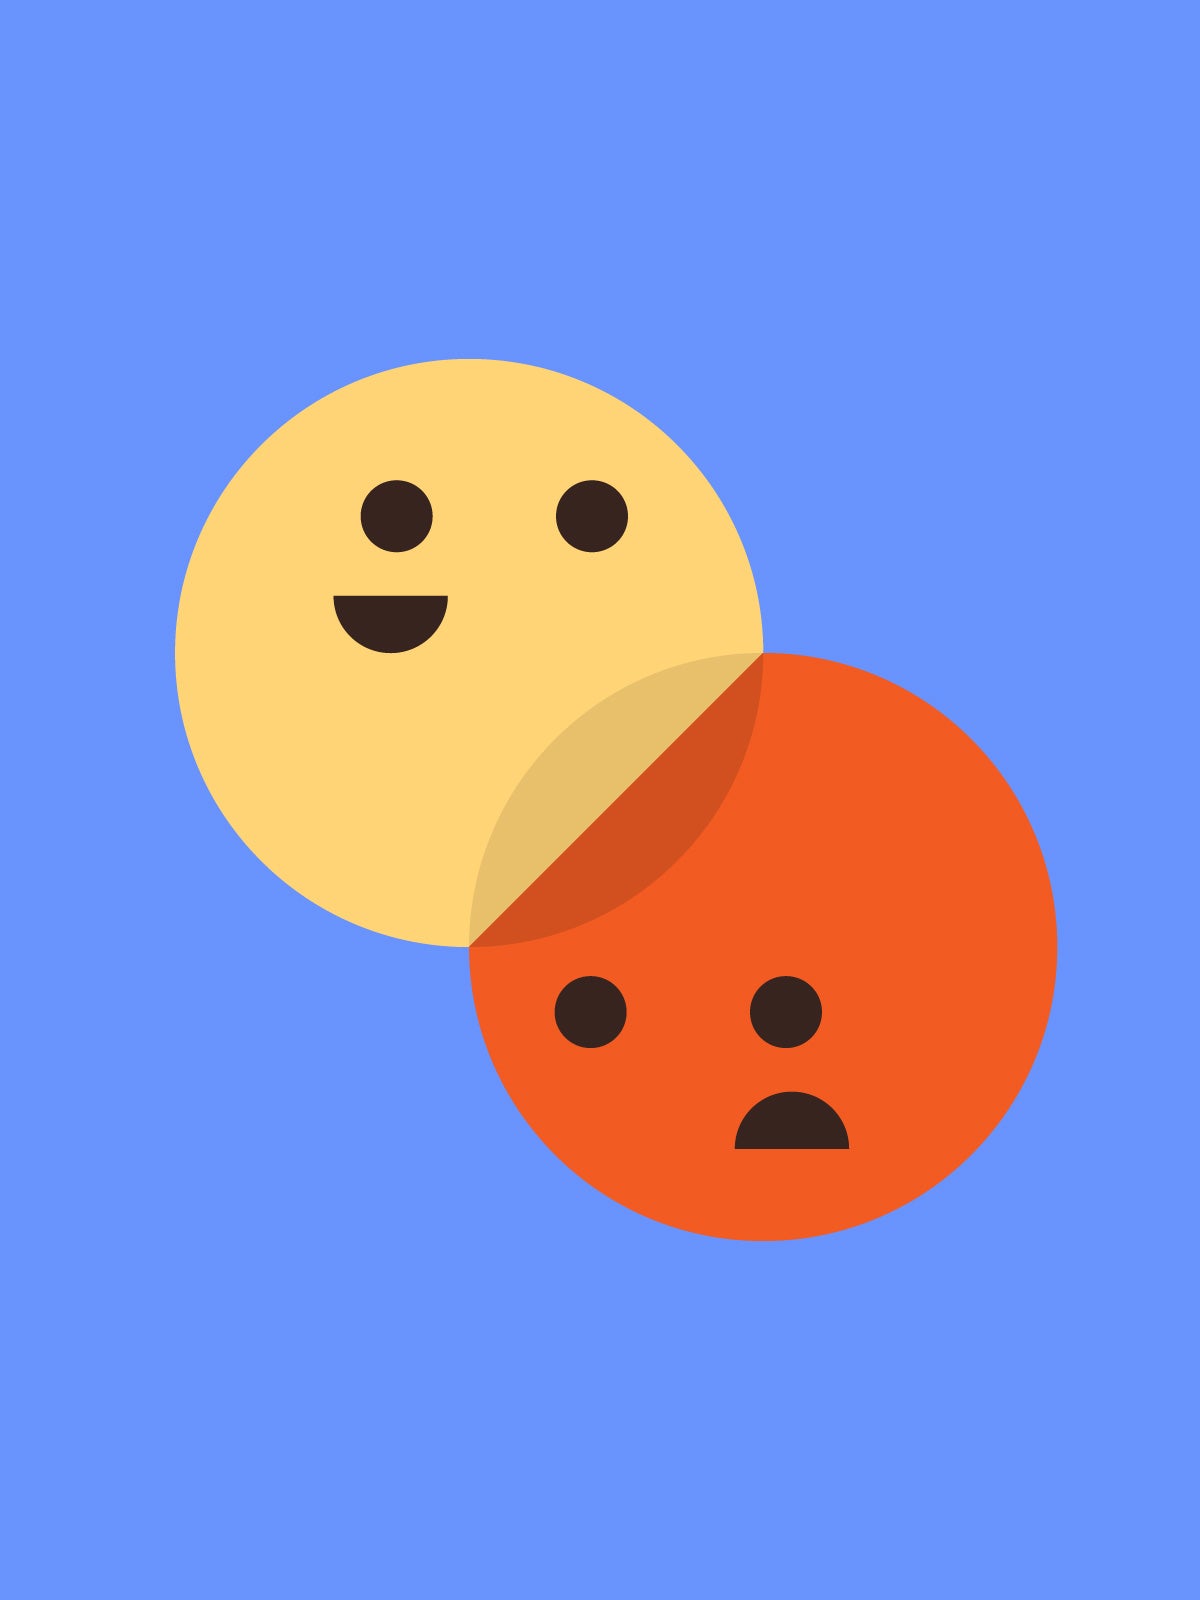 Yellow happiness and orange anger emoticons on a blue background.